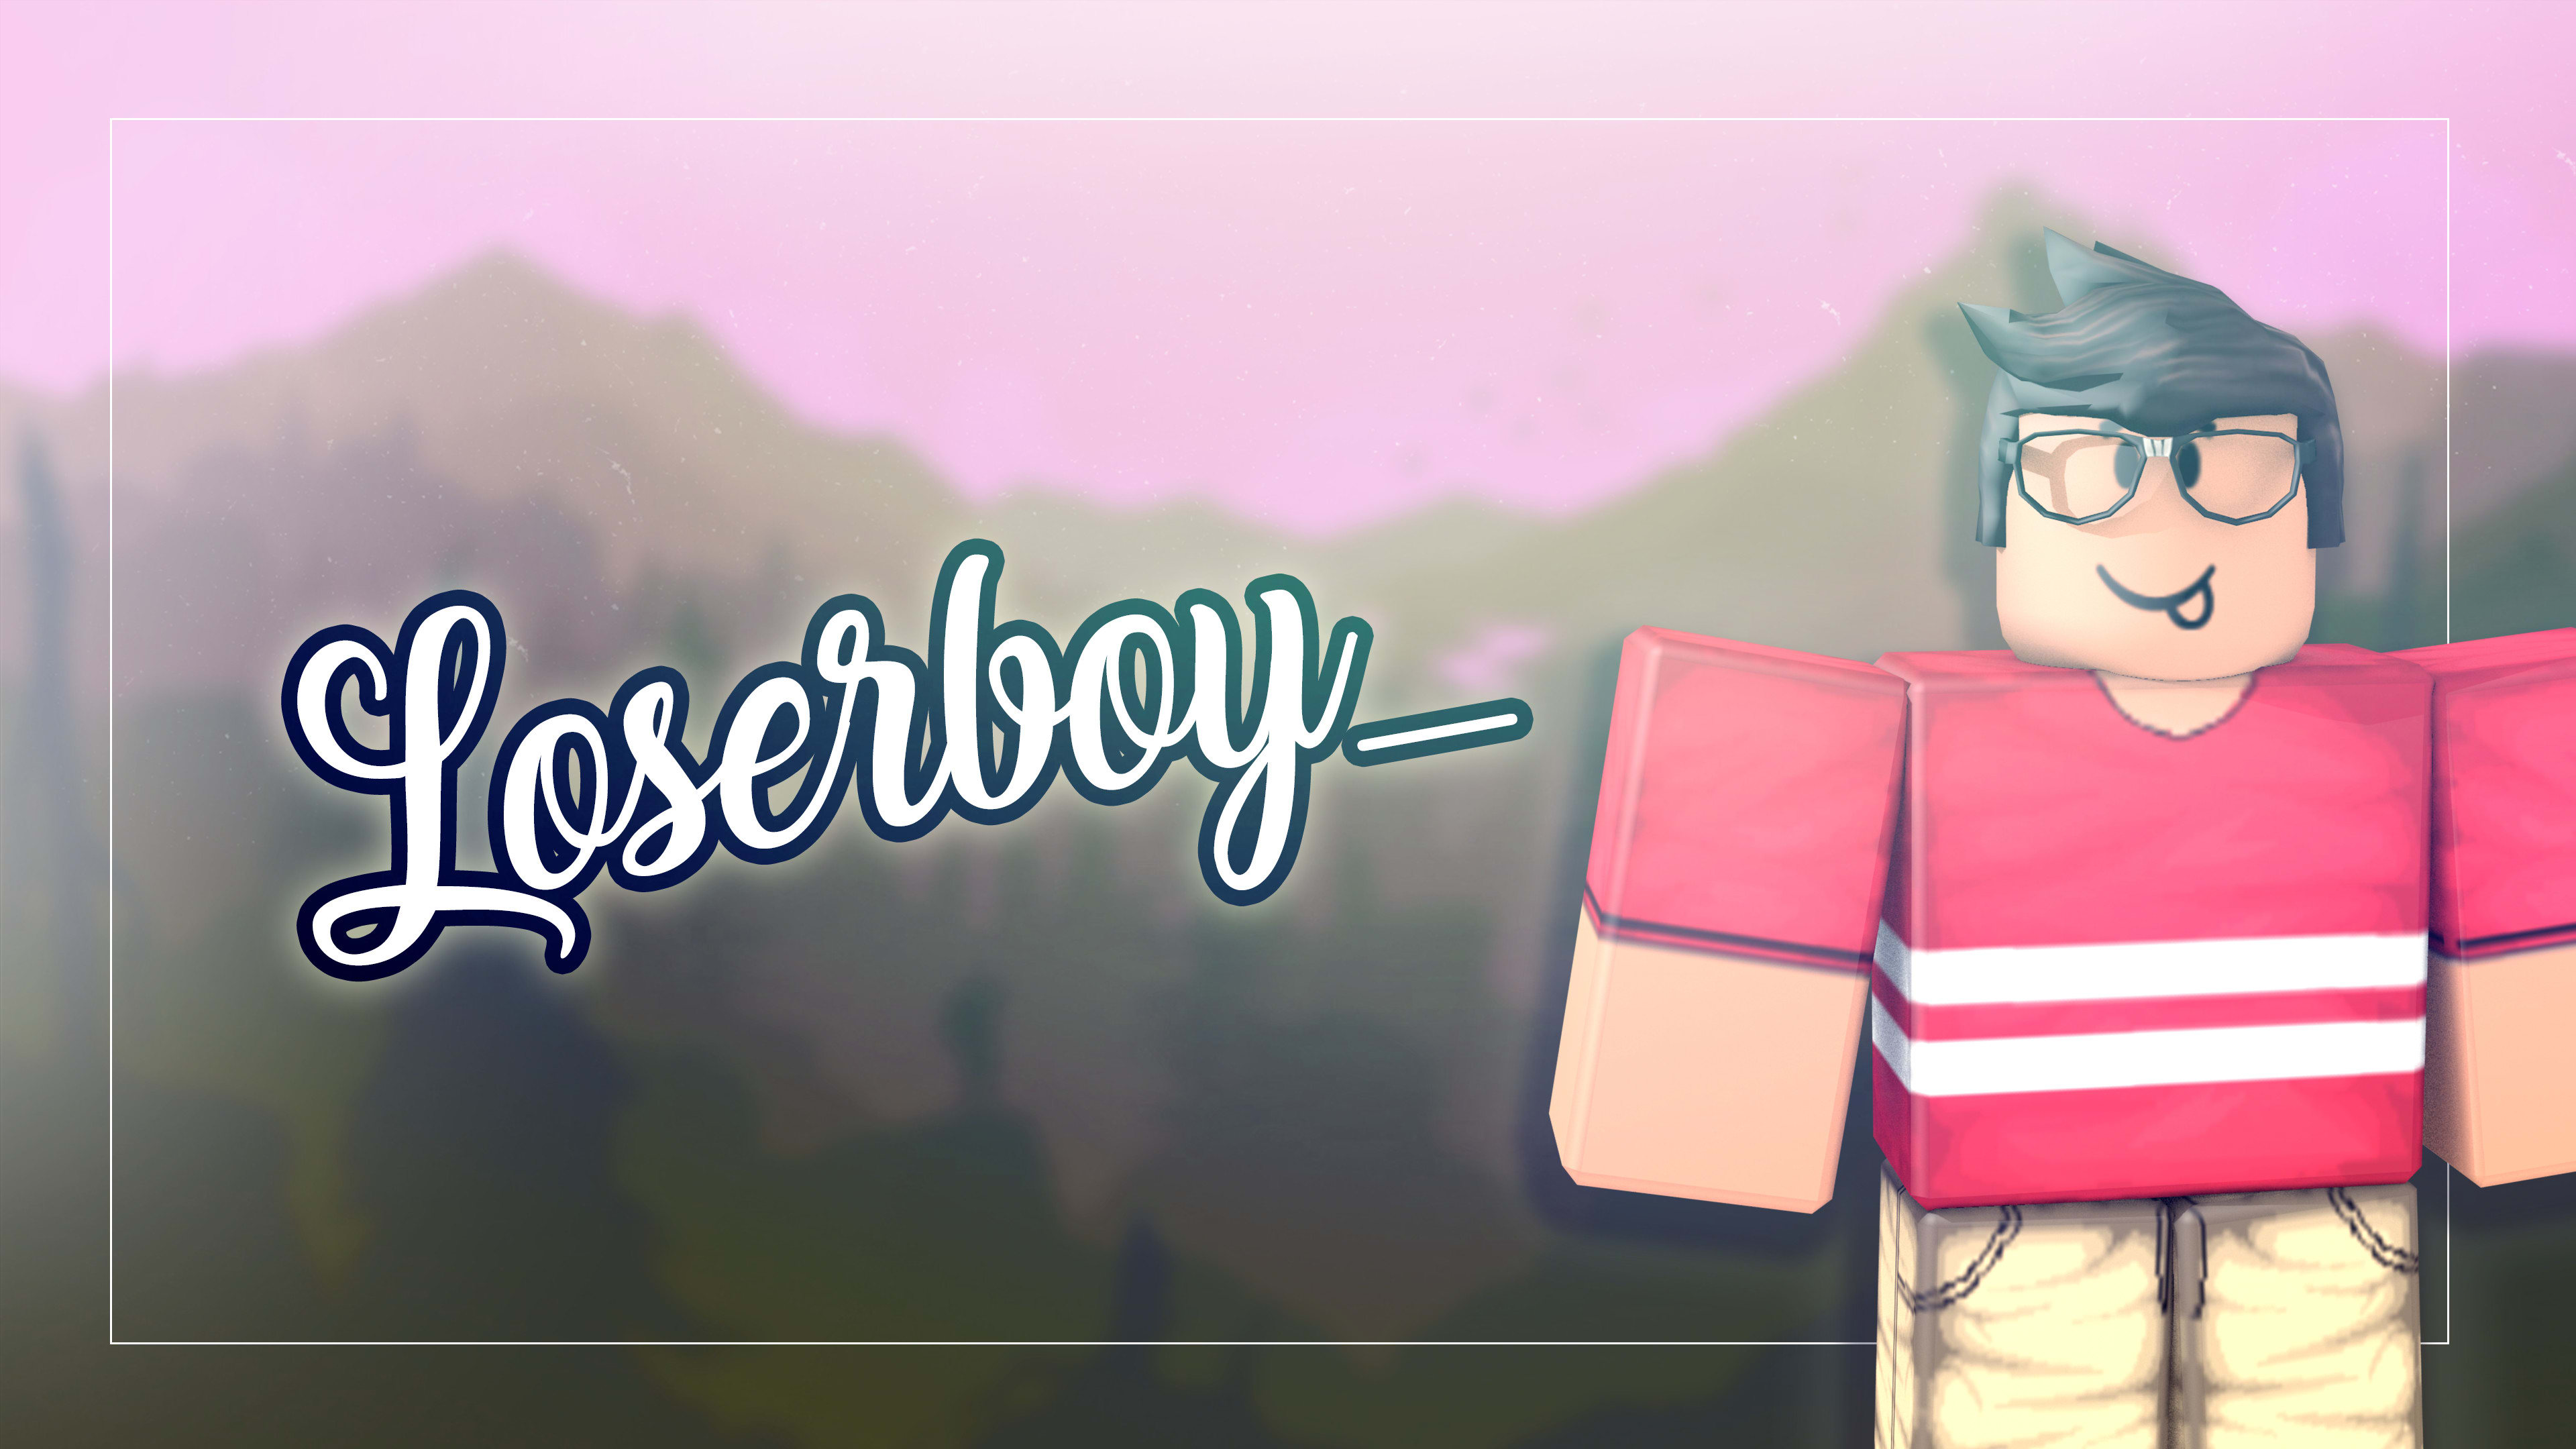 Make A Gfx Of Your Roblox Avatar By Loserboy